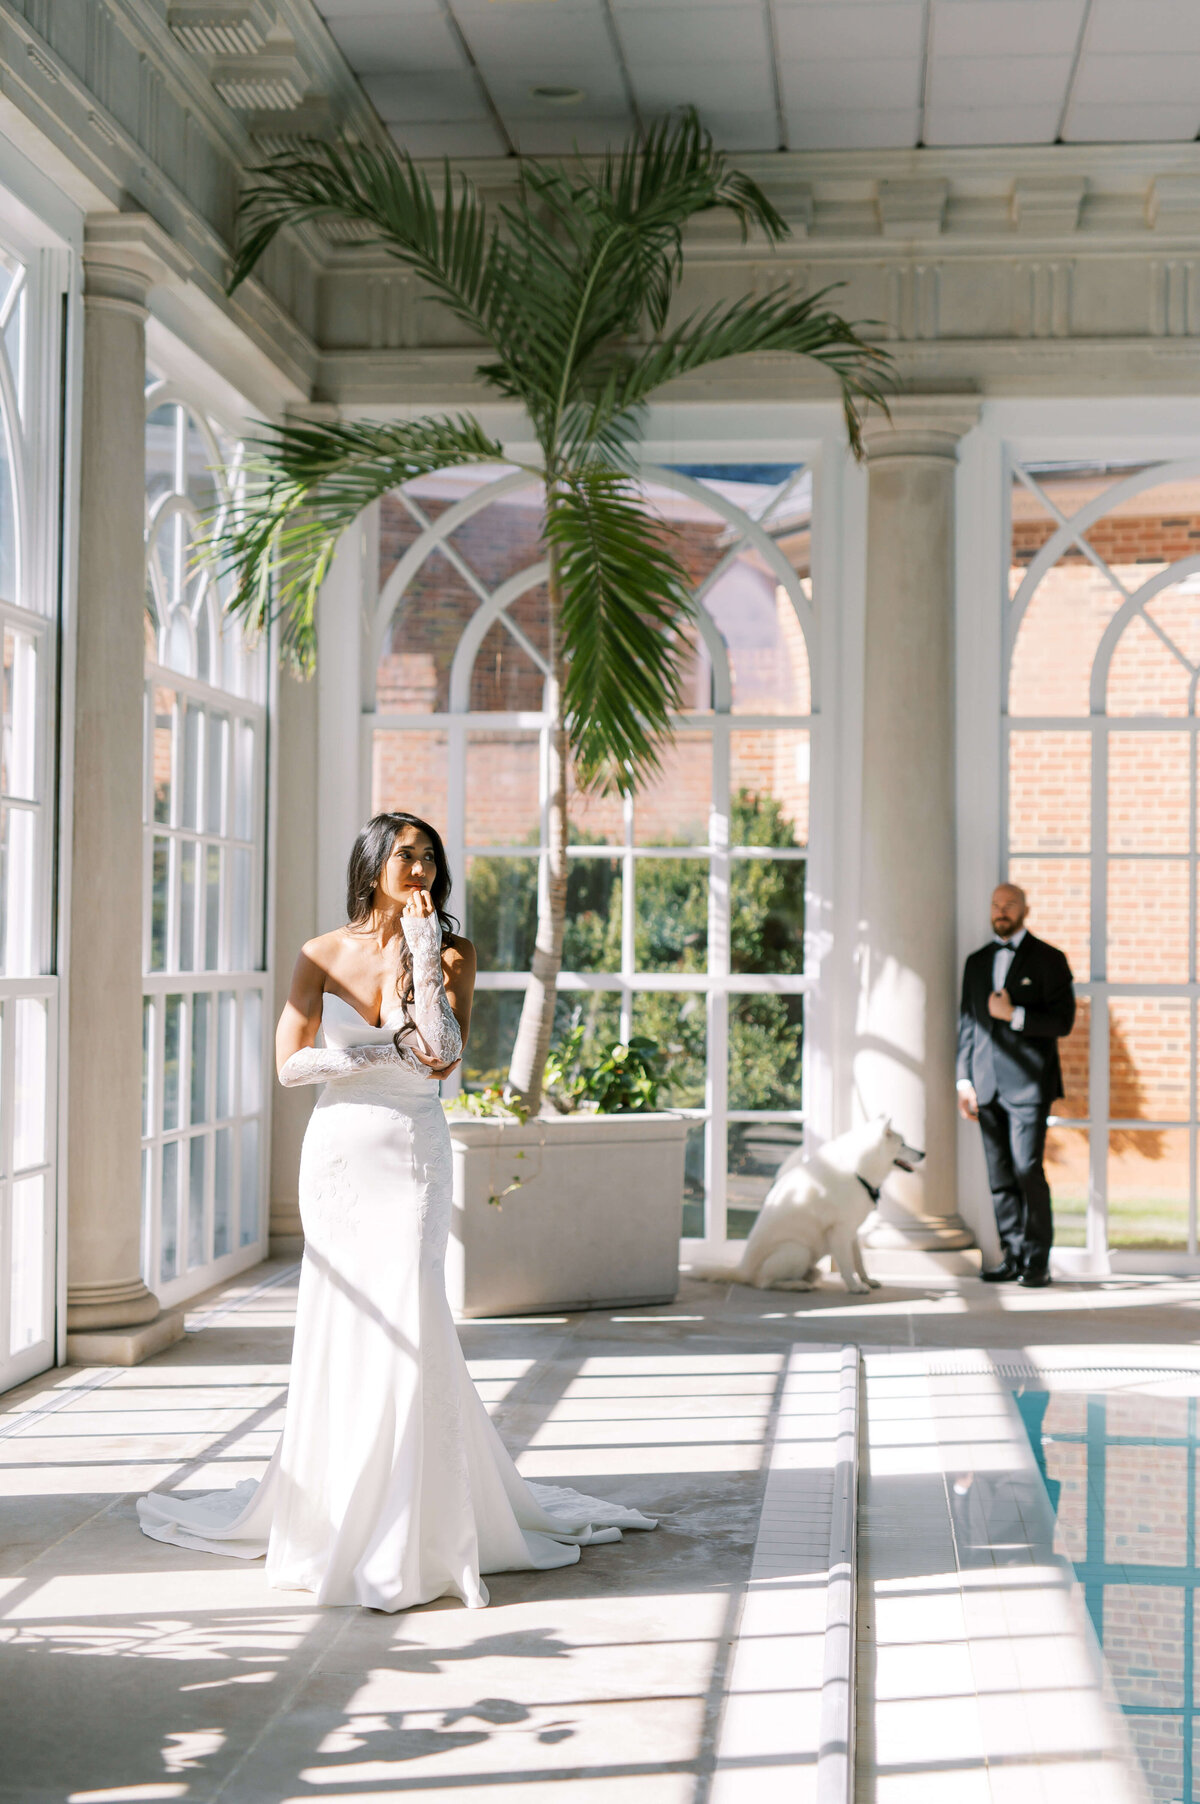 Bride posing for a portrait as groom admires from background before their wedding day at Larz Anderson House